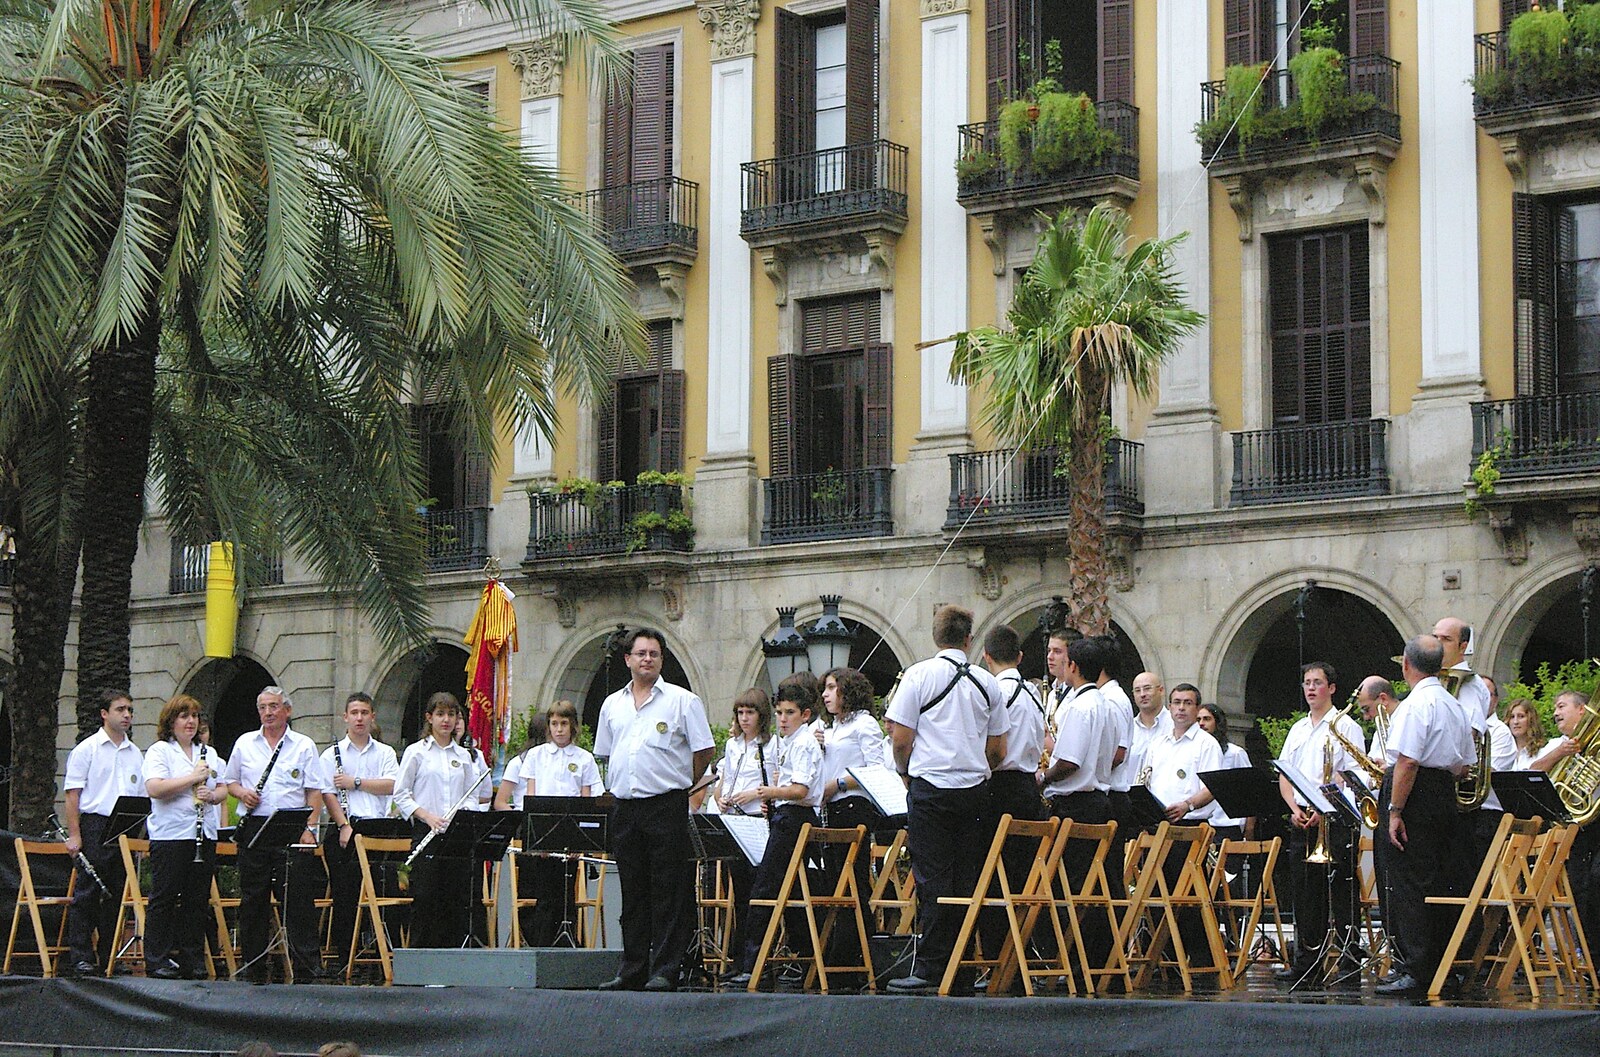 A wind band does a performance in Plaça Réia from Two Days in Barcelona, Catalunya, Spain - 22nd September 2006